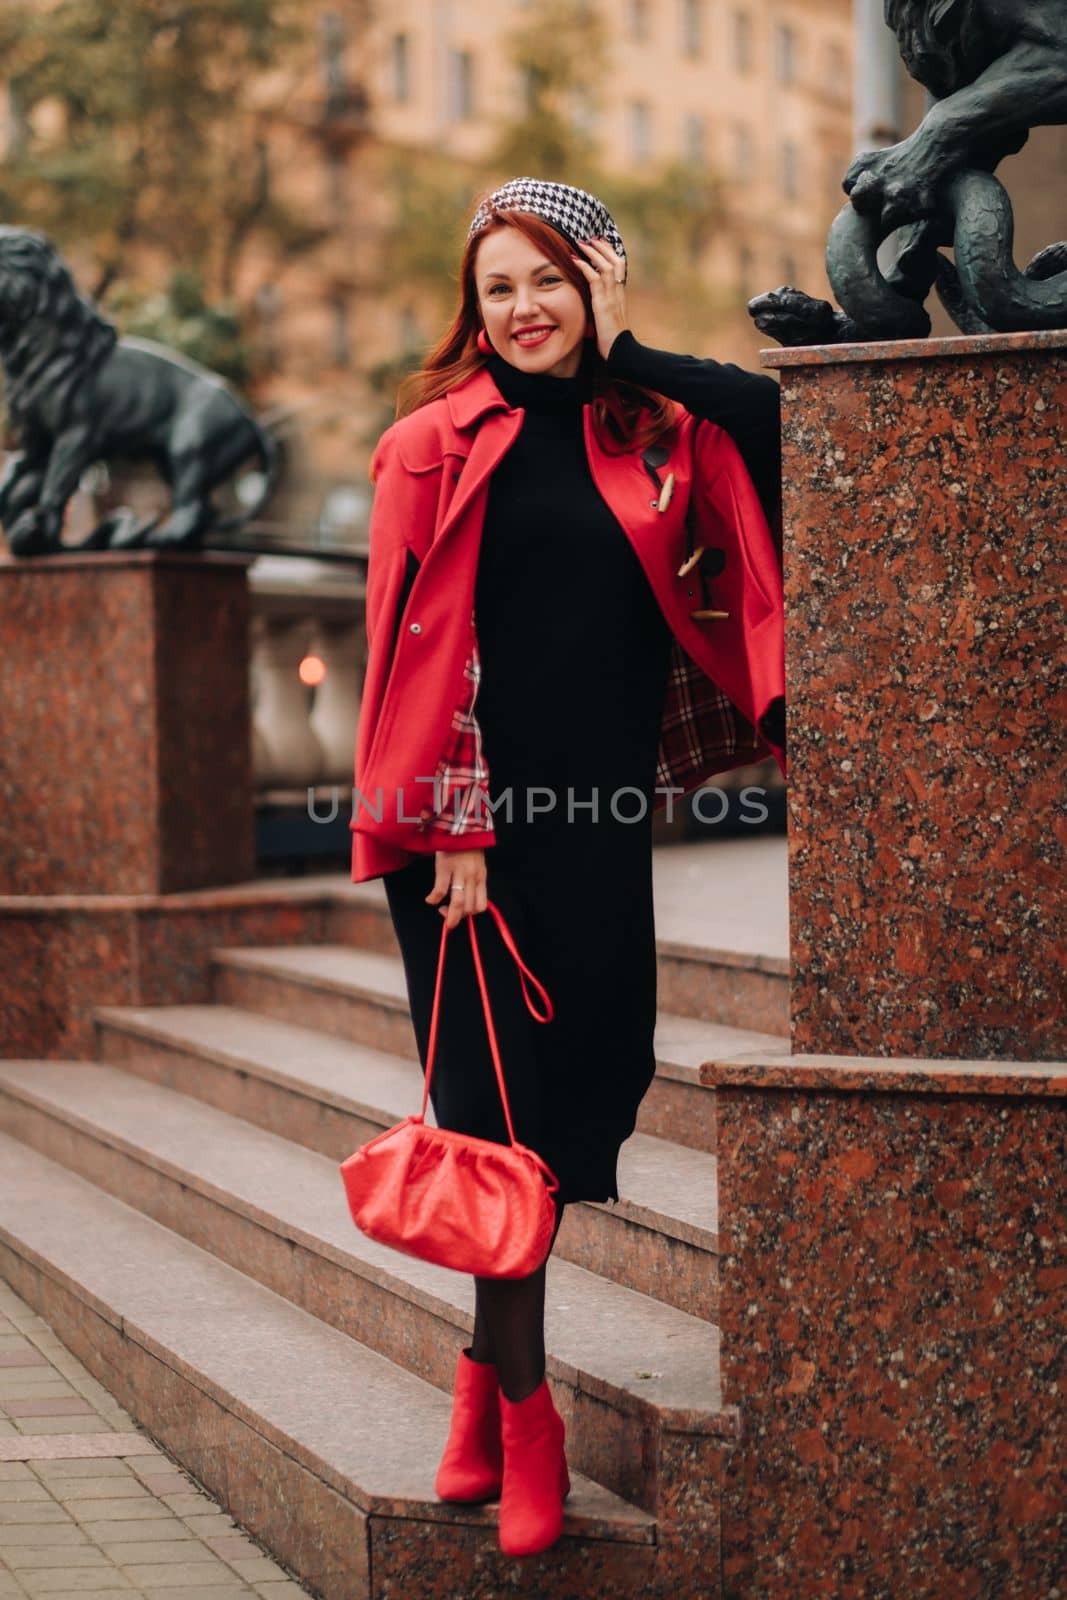 A beautiful stylish woman dressed in an elegant red coat with a stylish red handbag in the autumn city.